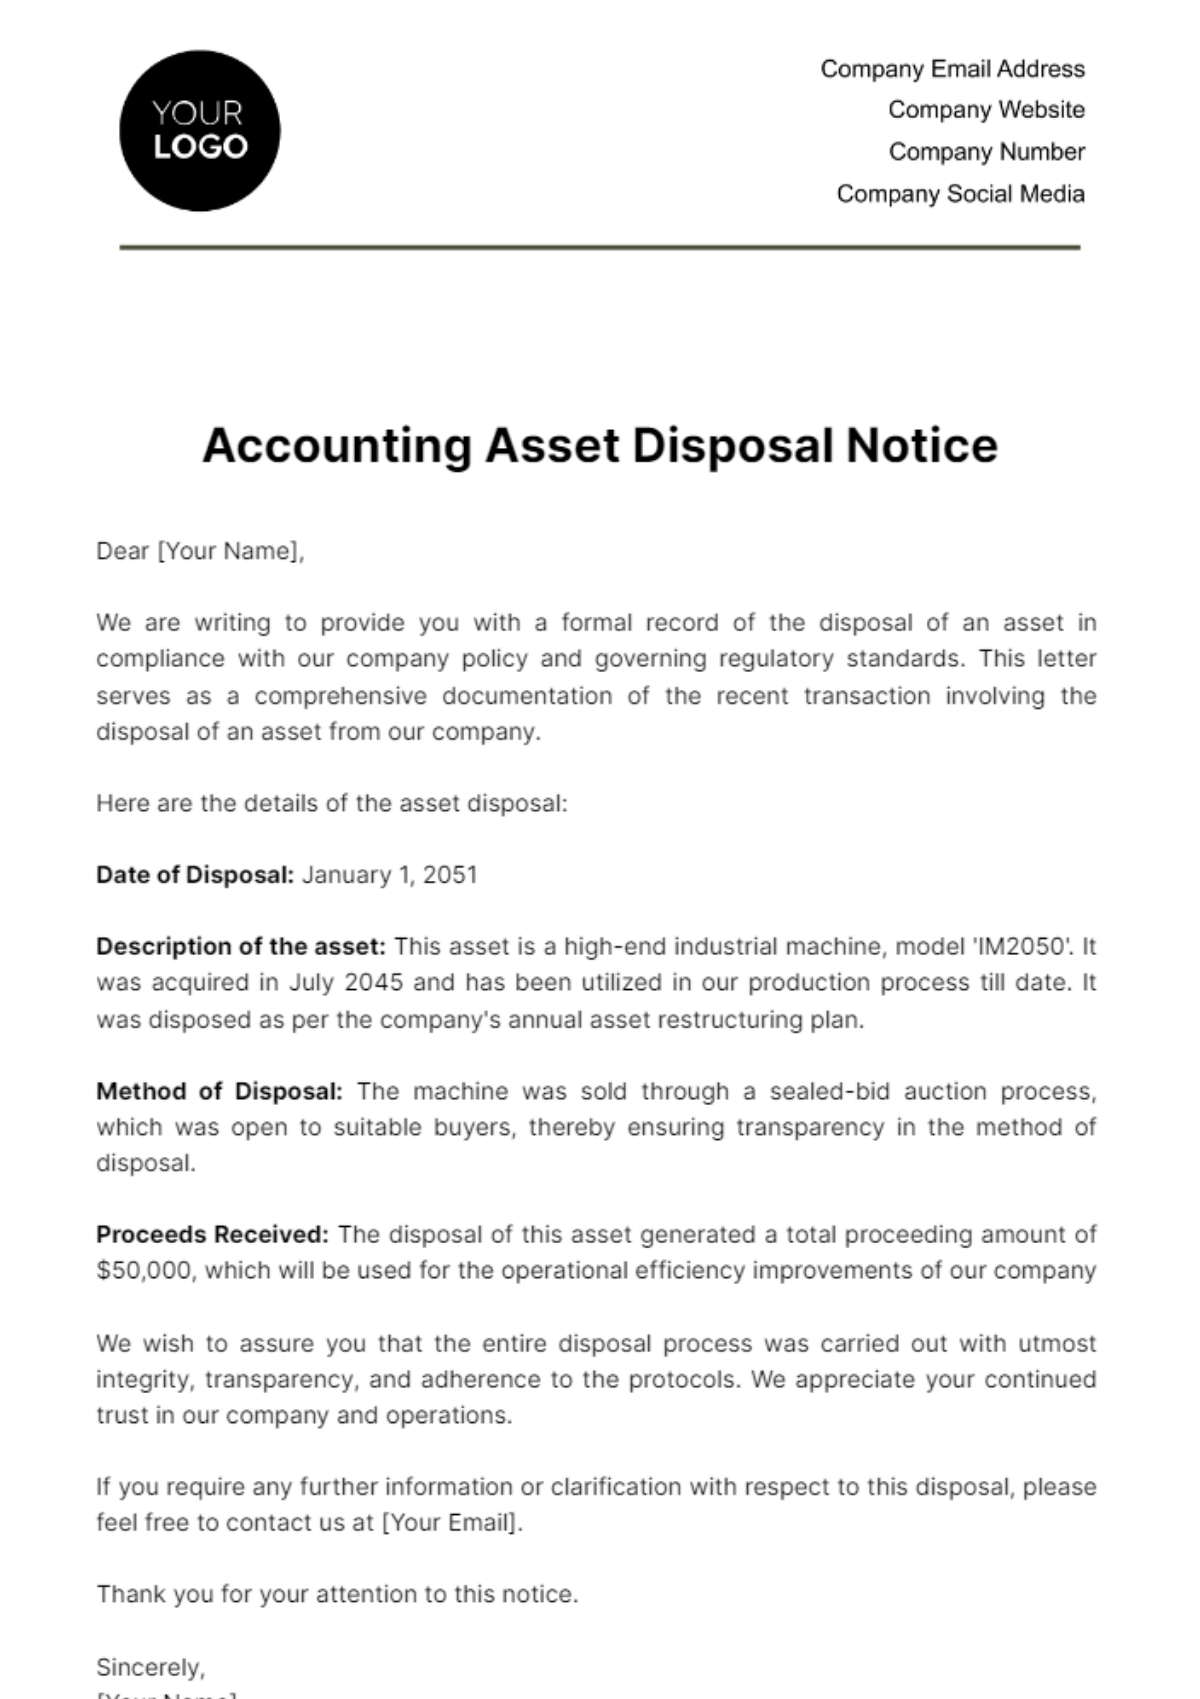 Free Accounting Asset Disposal Notice Template